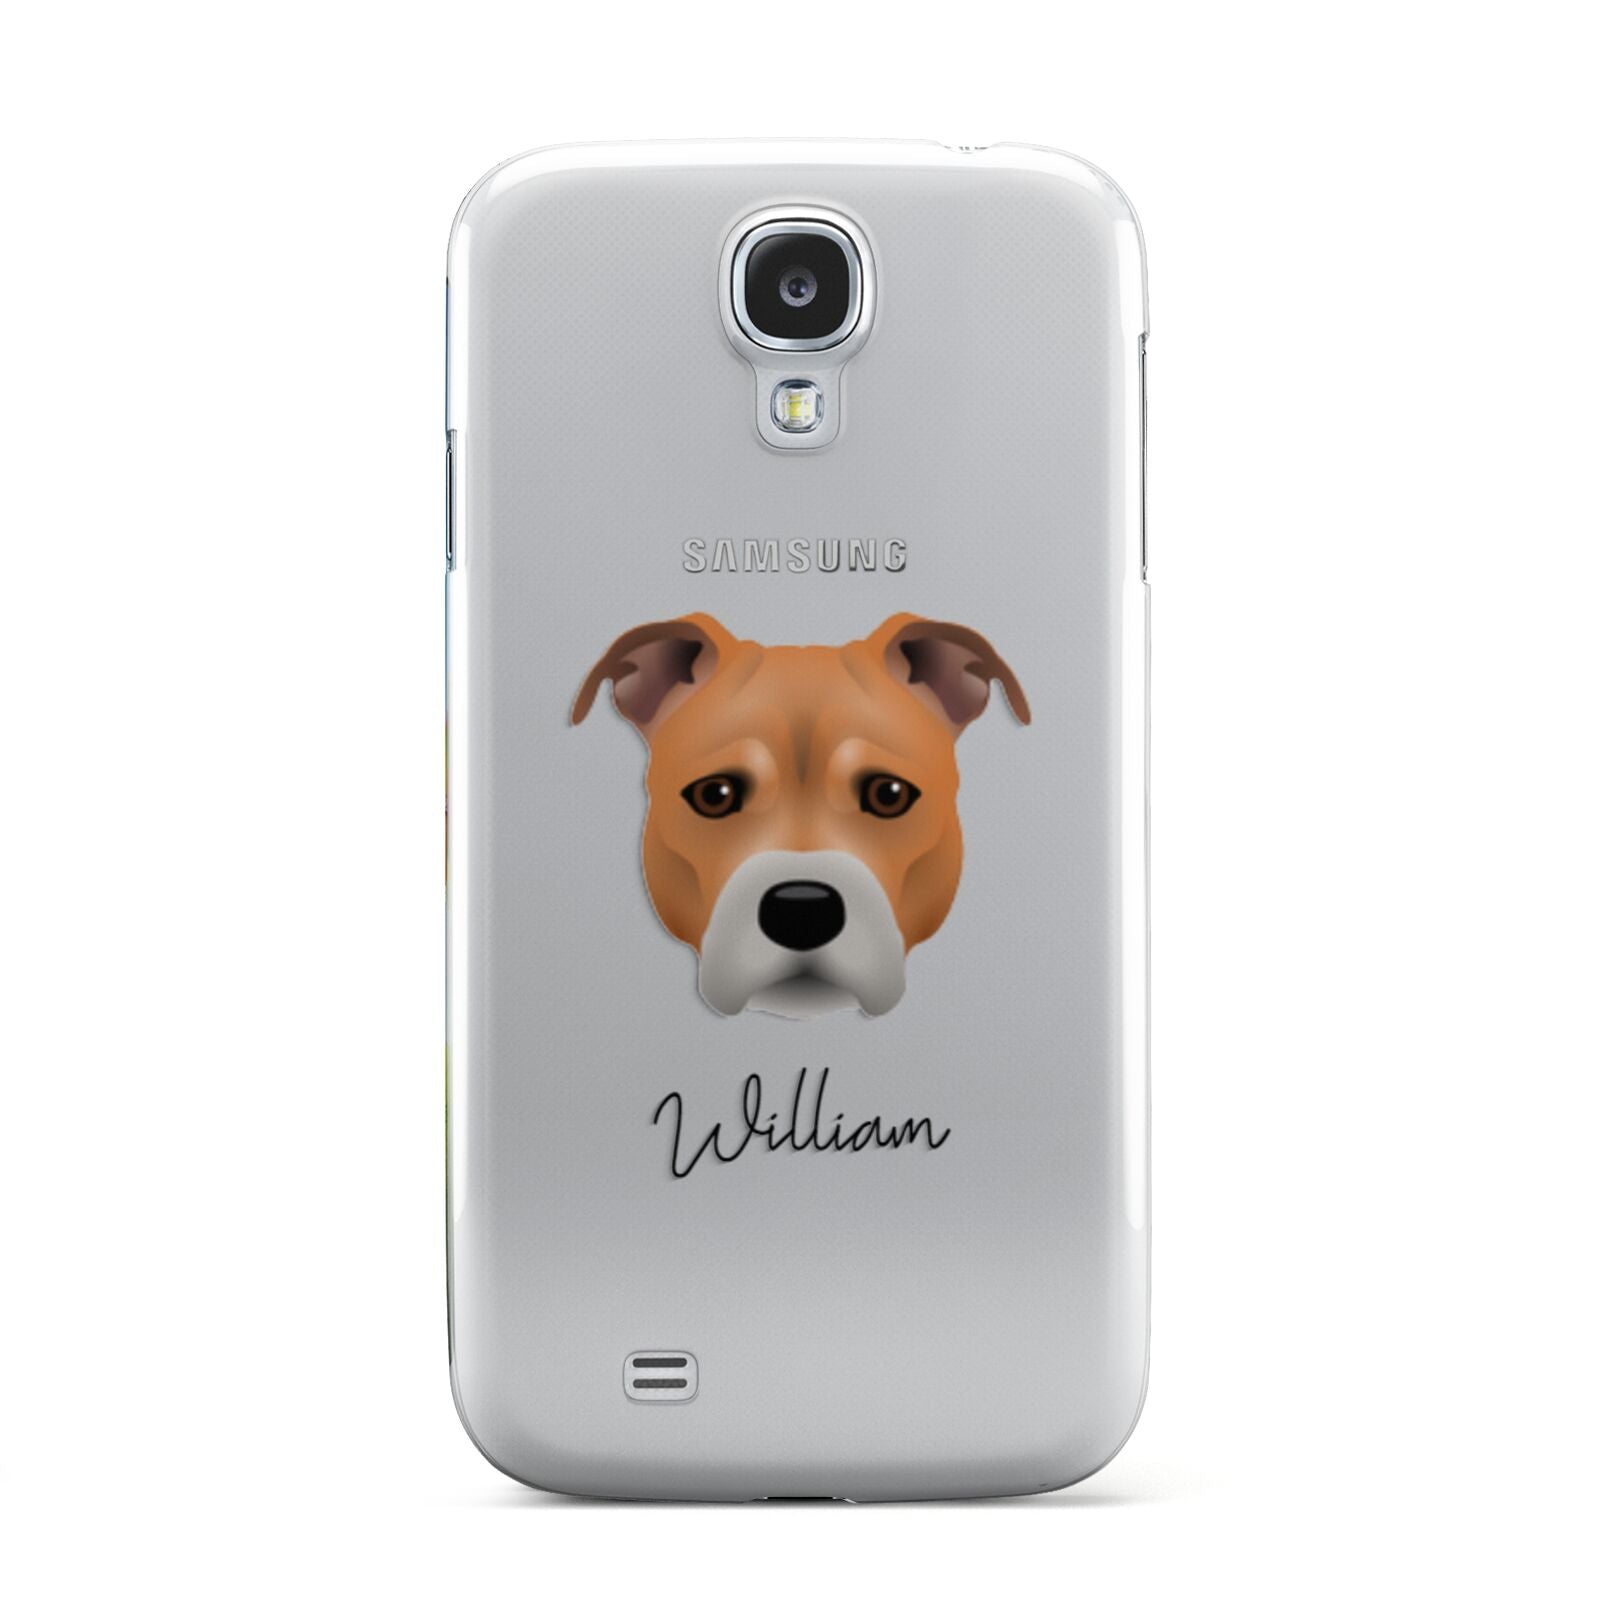 Staffordshire Bull Terrier Personalised Samsung Galaxy S4 Case